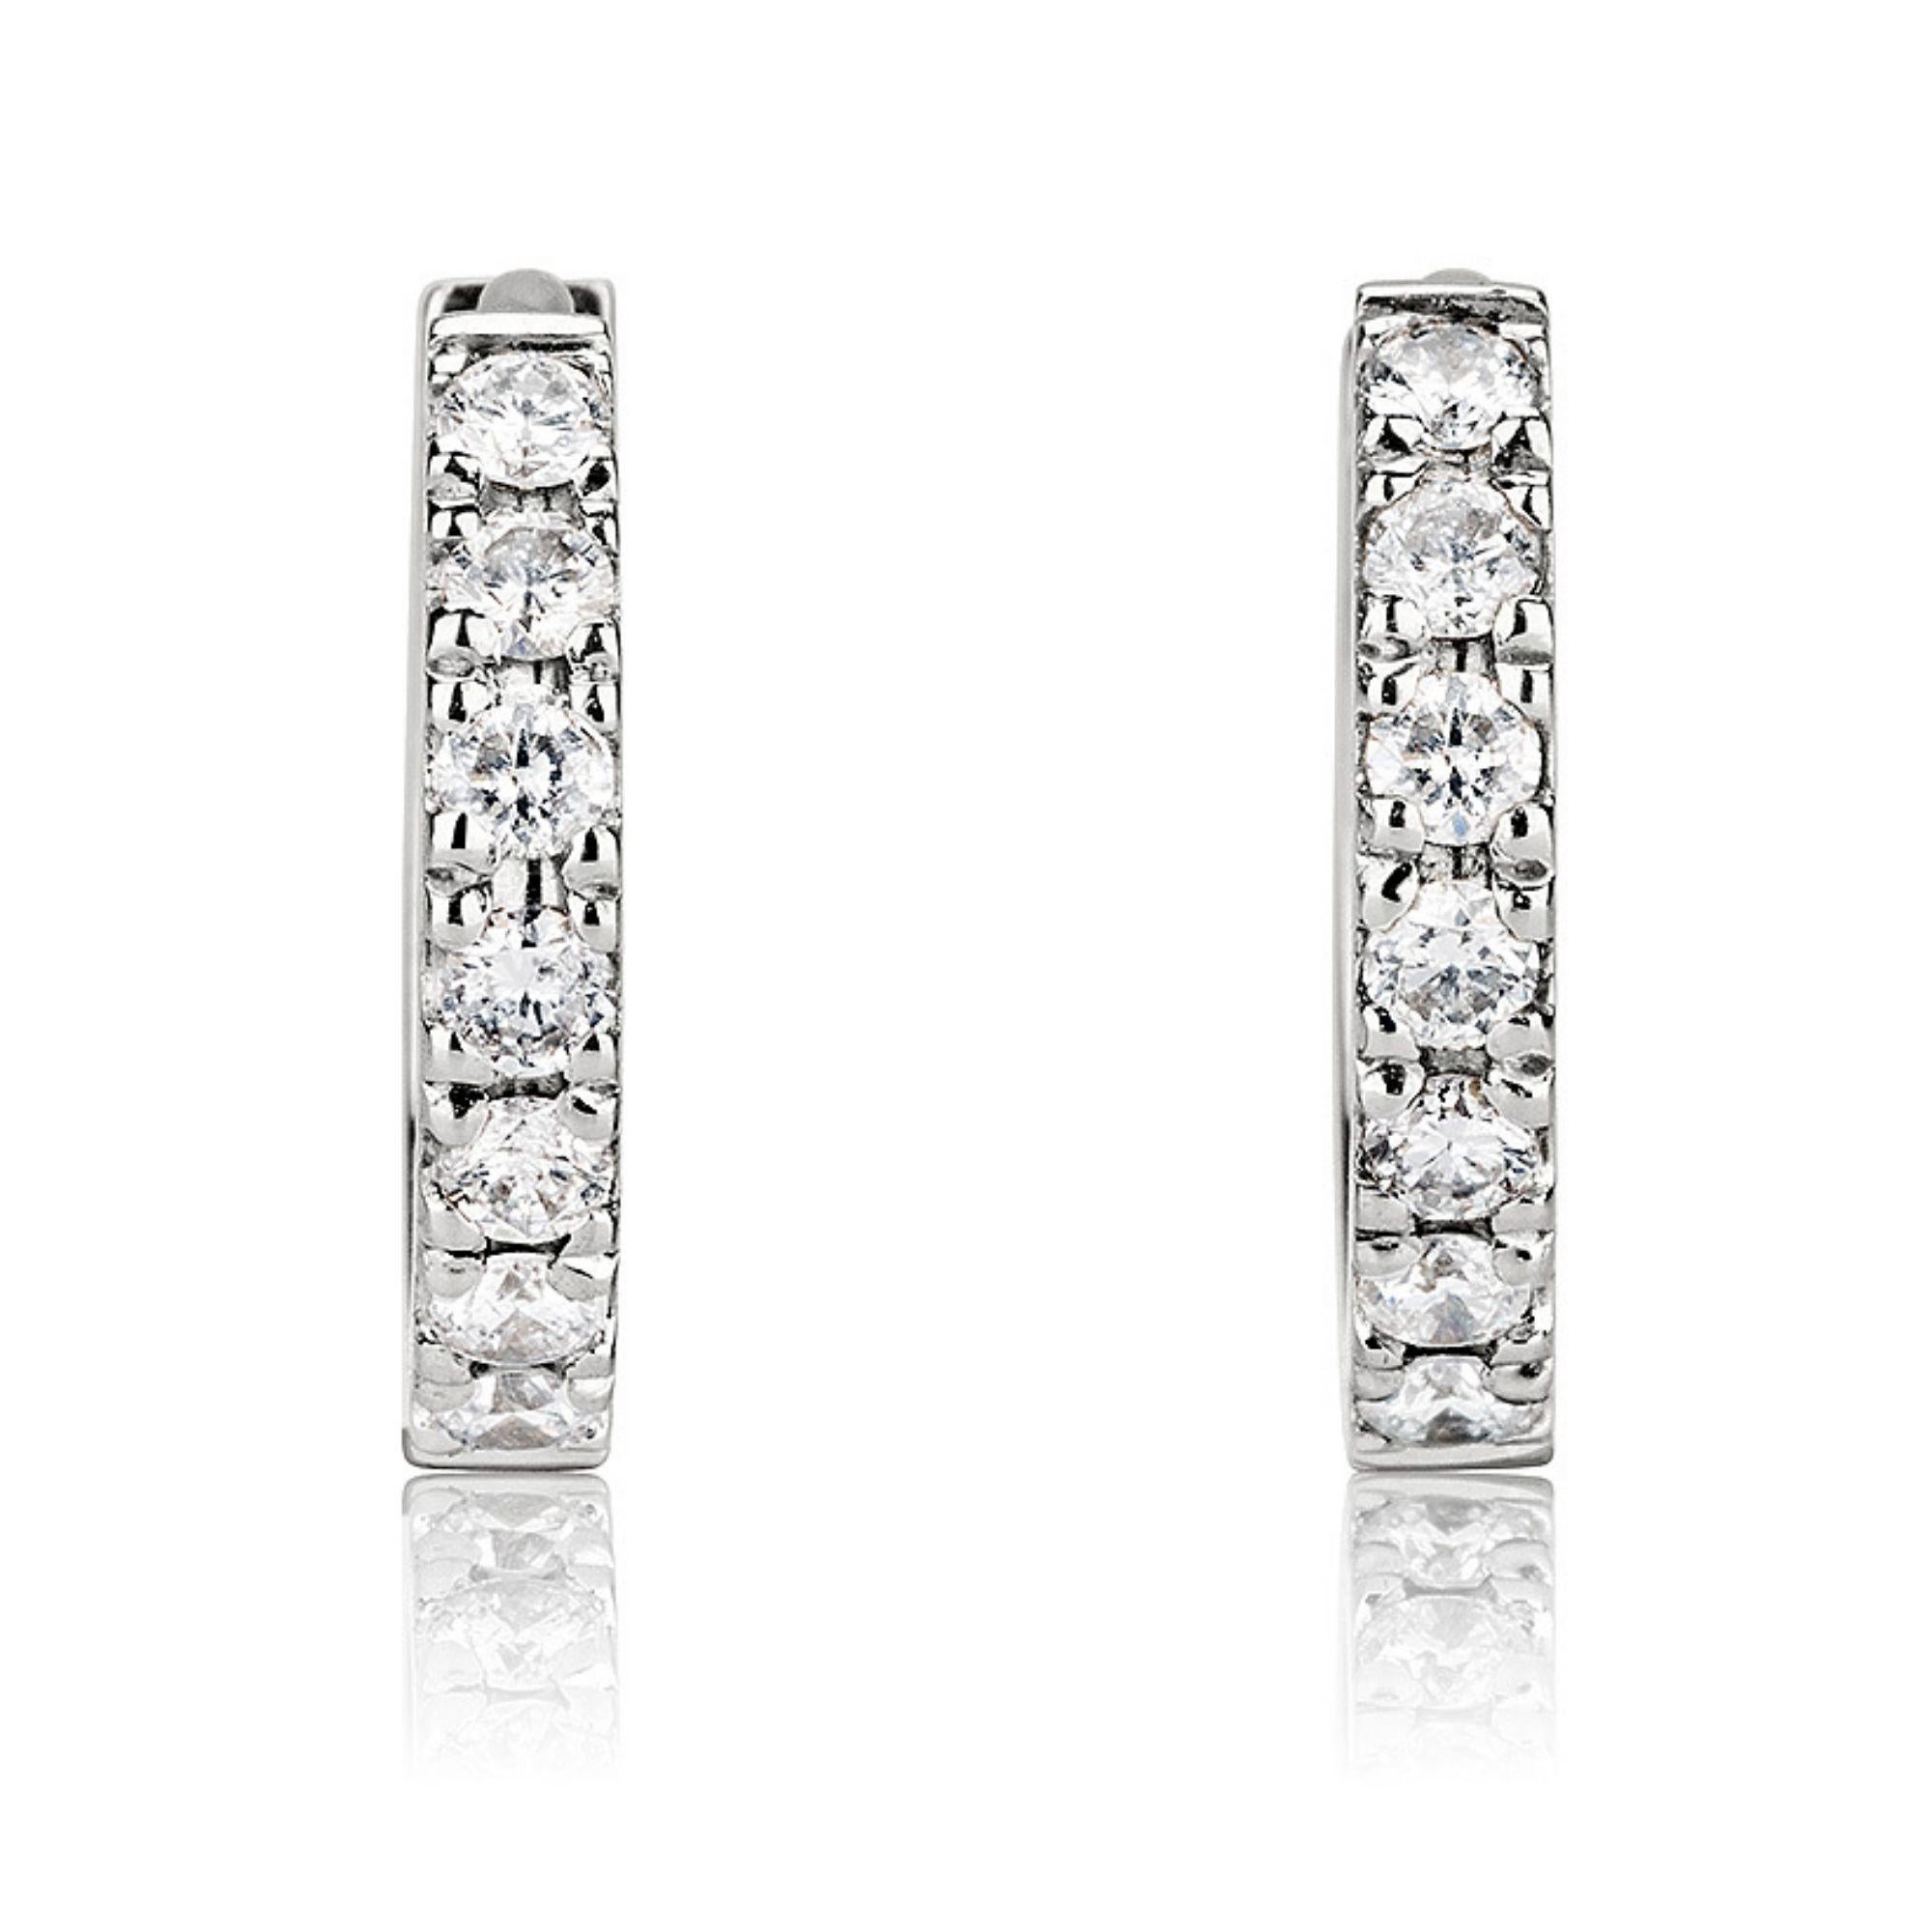 0.30 Carat Diamond Huggie Hoop Earrings in 14K White Gold - Shlomit Rogel

A staple in every woman's jewelry collection - classic diamond hoop earrings. Handcrafted from 14k white gold with a row of pave set genuine diamonds totaling 0.30 carat,